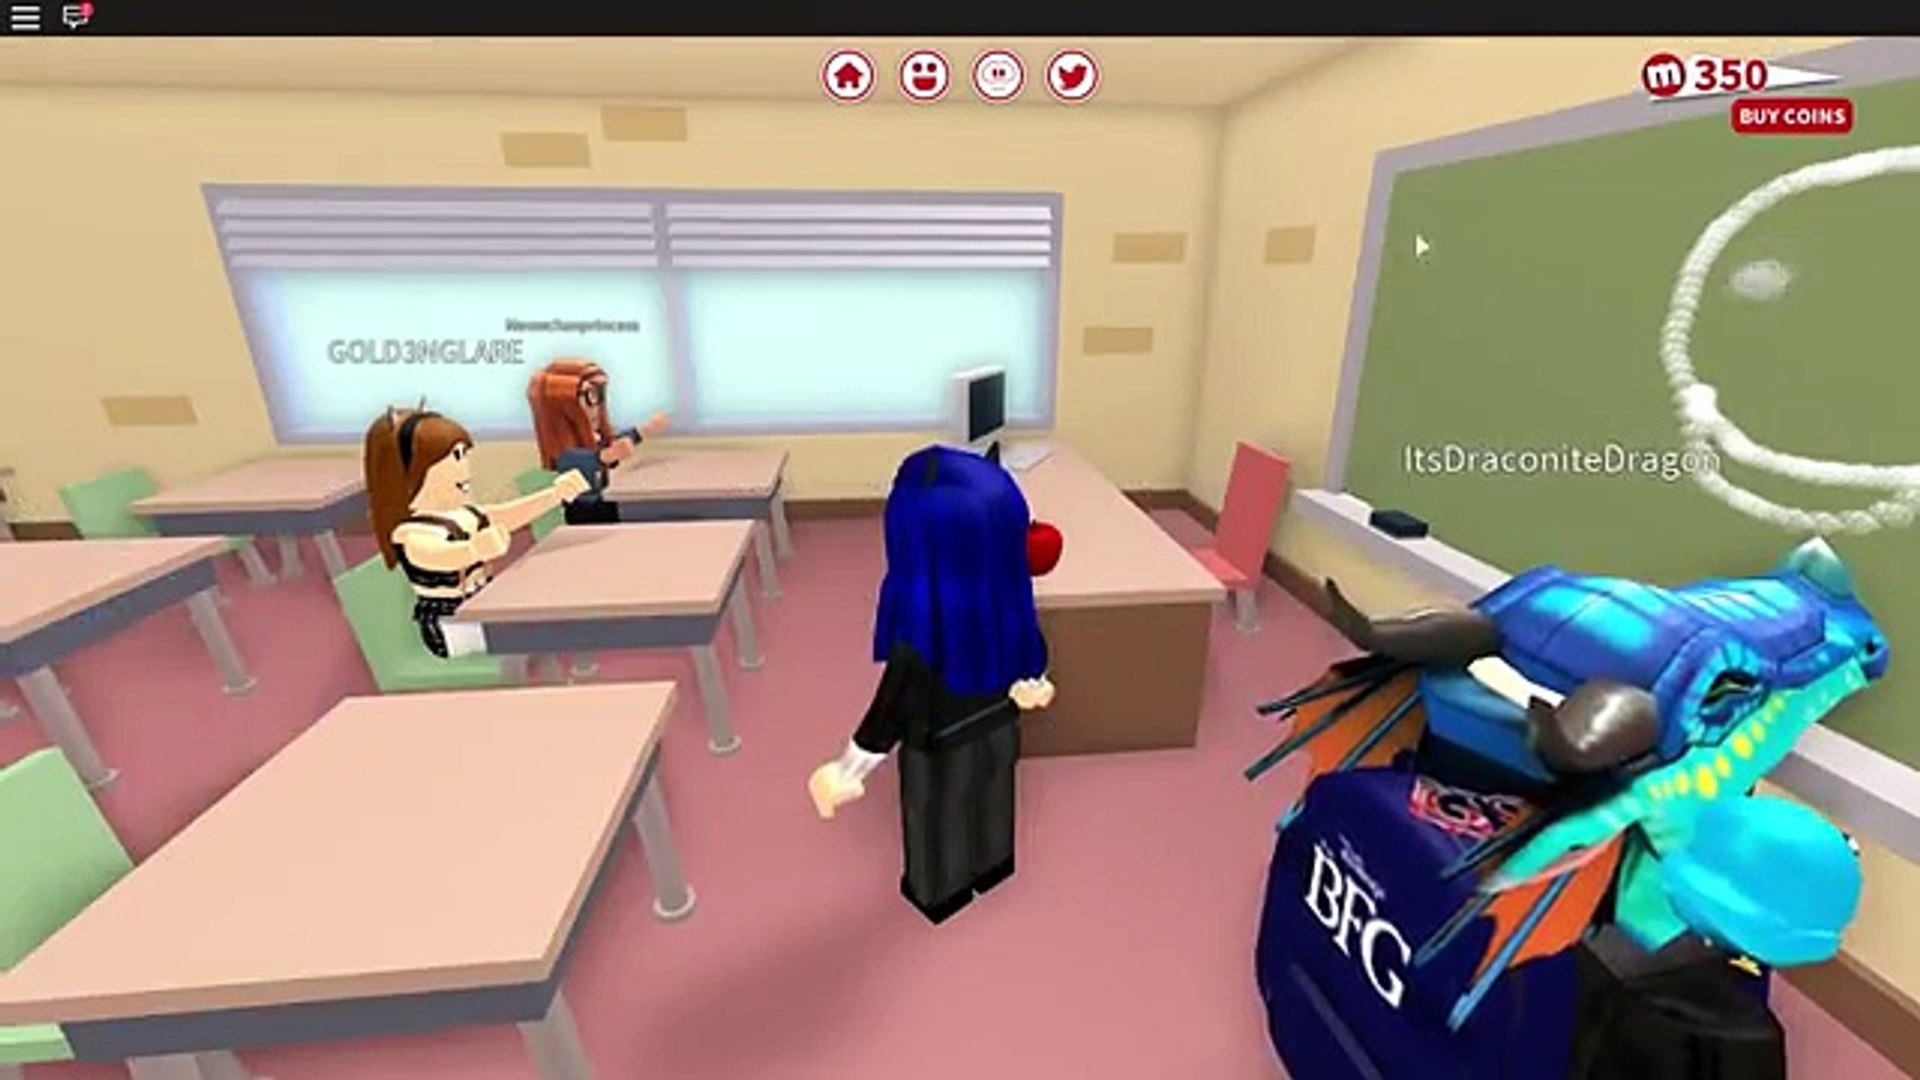 Itsfunneh Playing All The Roblox Games